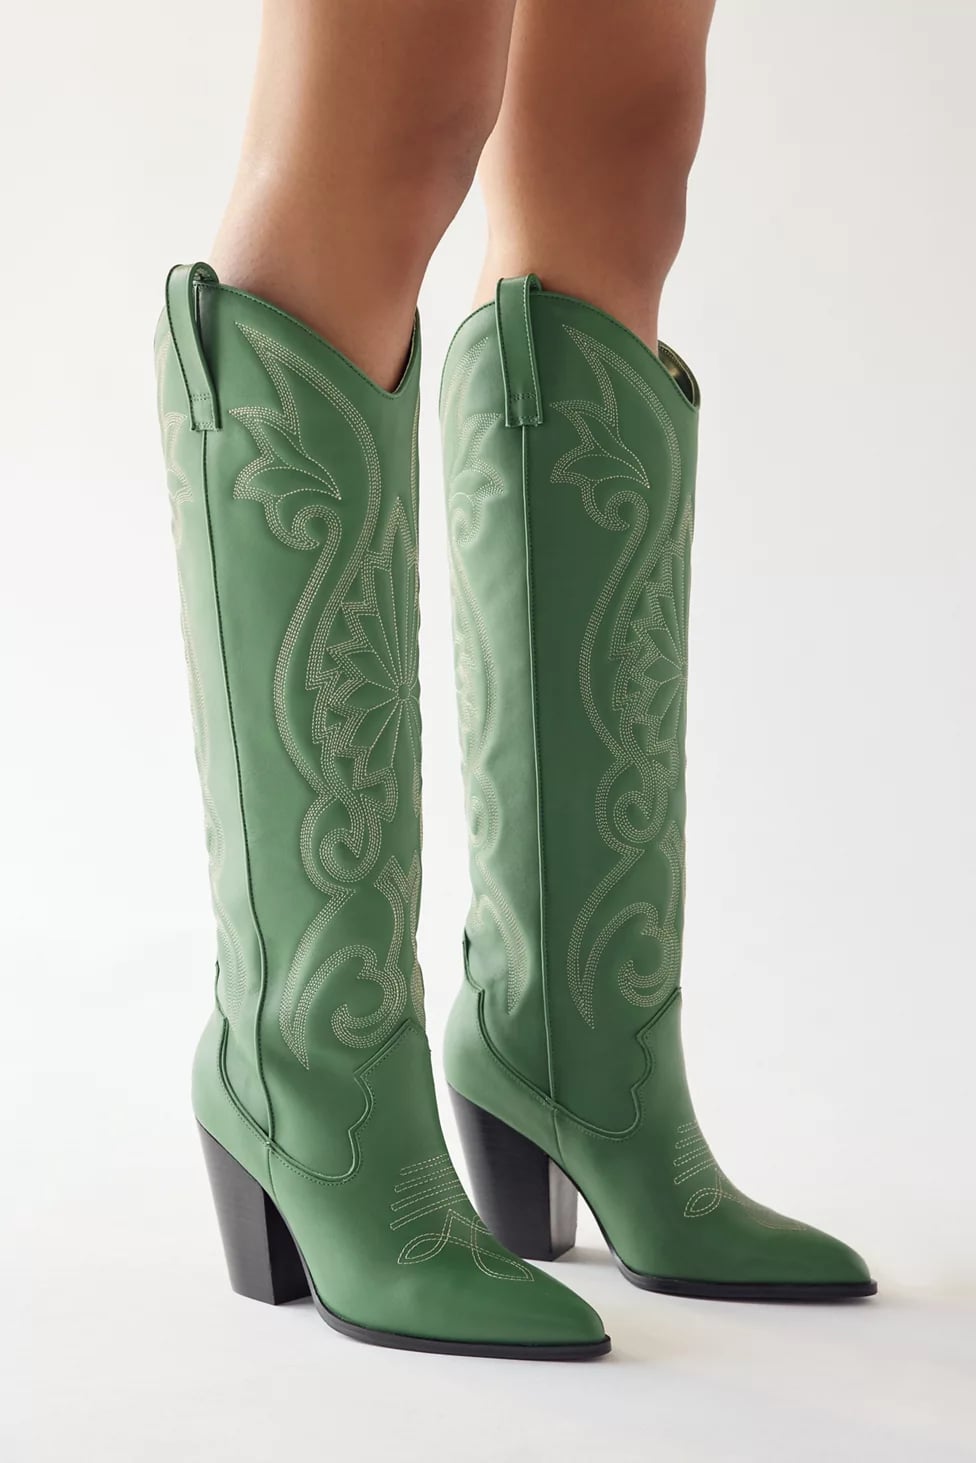 Green Boots: Steve Madden Cowboy Boot | Not Sure About the Cowboy Boot Trend? Will Be After Seeing These 12 Pairs | POPSUGAR Fashion Photo 4